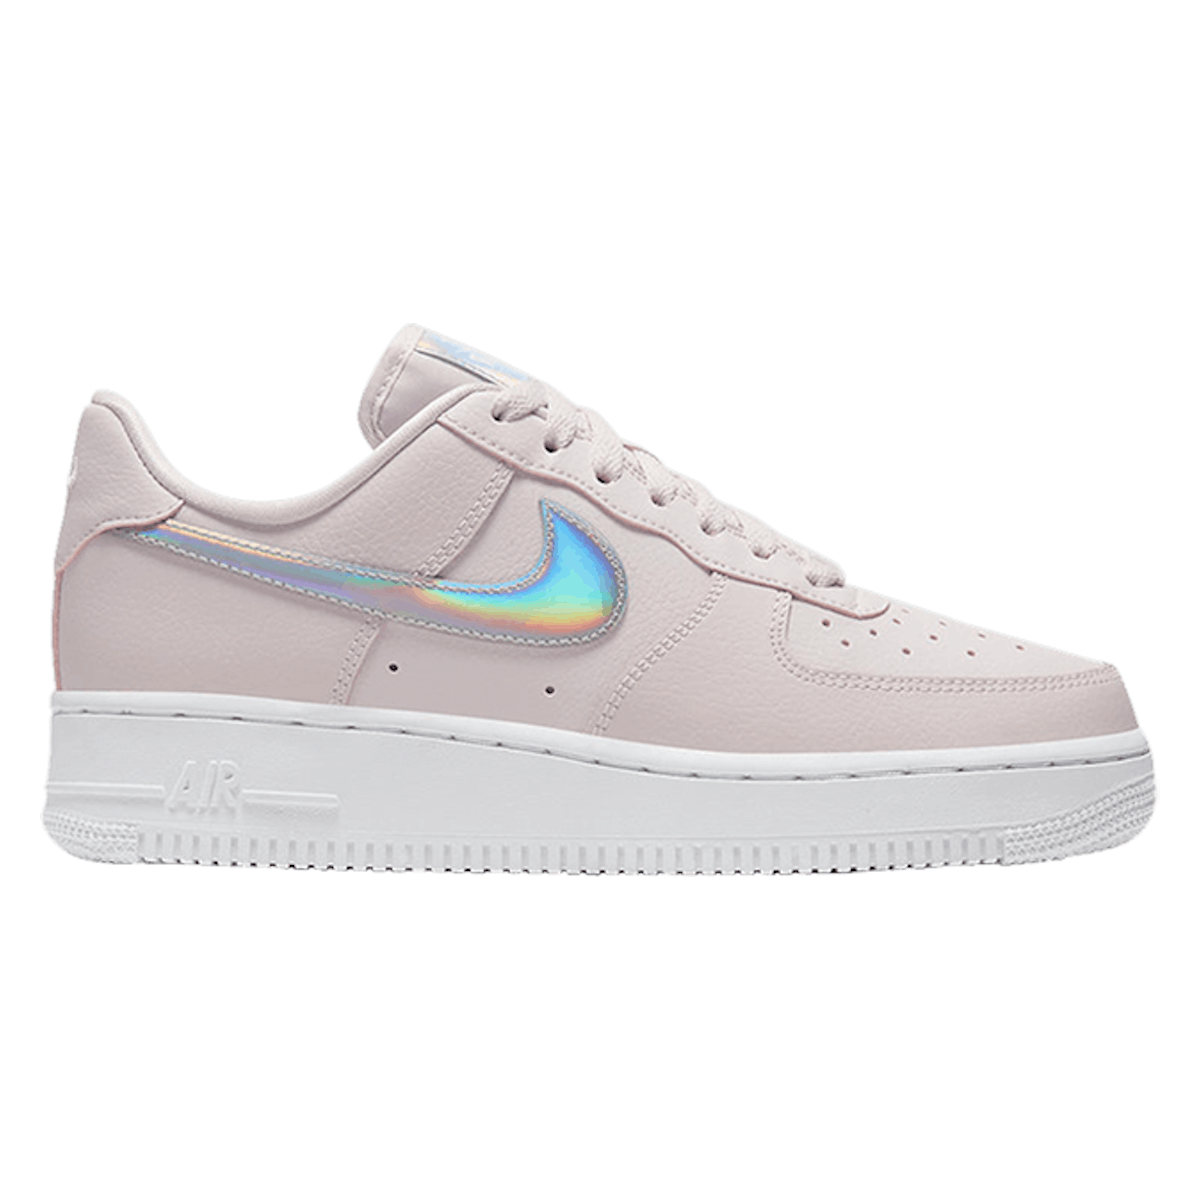 Nike WMNS Air Force 1 Low "Pink Iridescent"